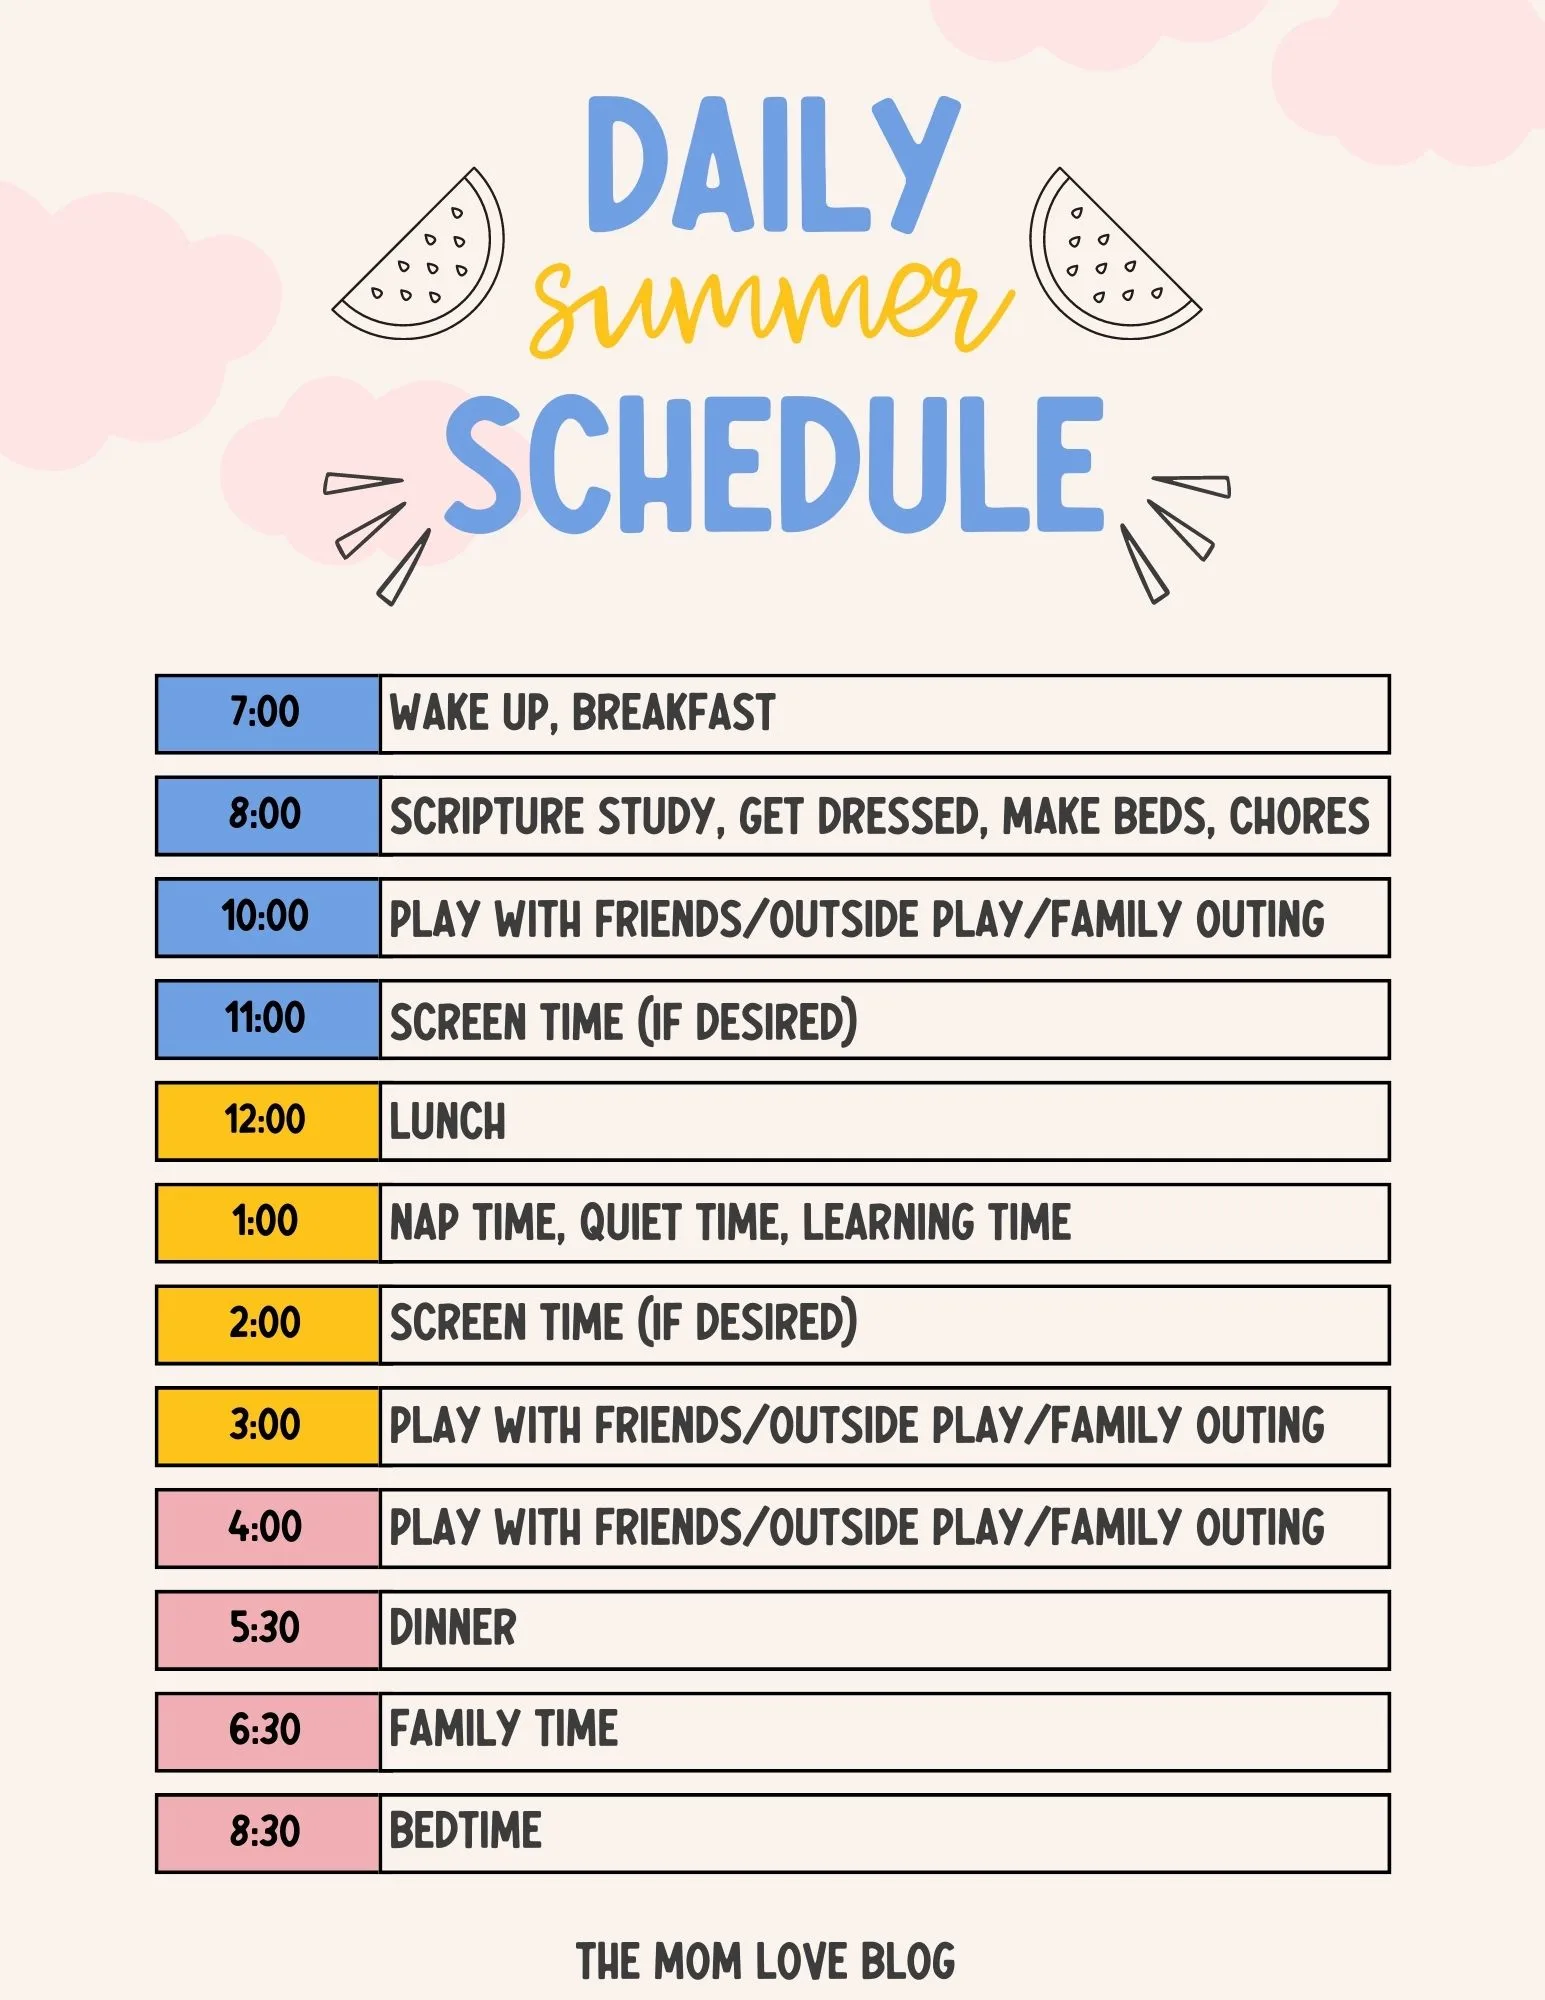 Sample daily summer schedule for kids with hourly activities. 